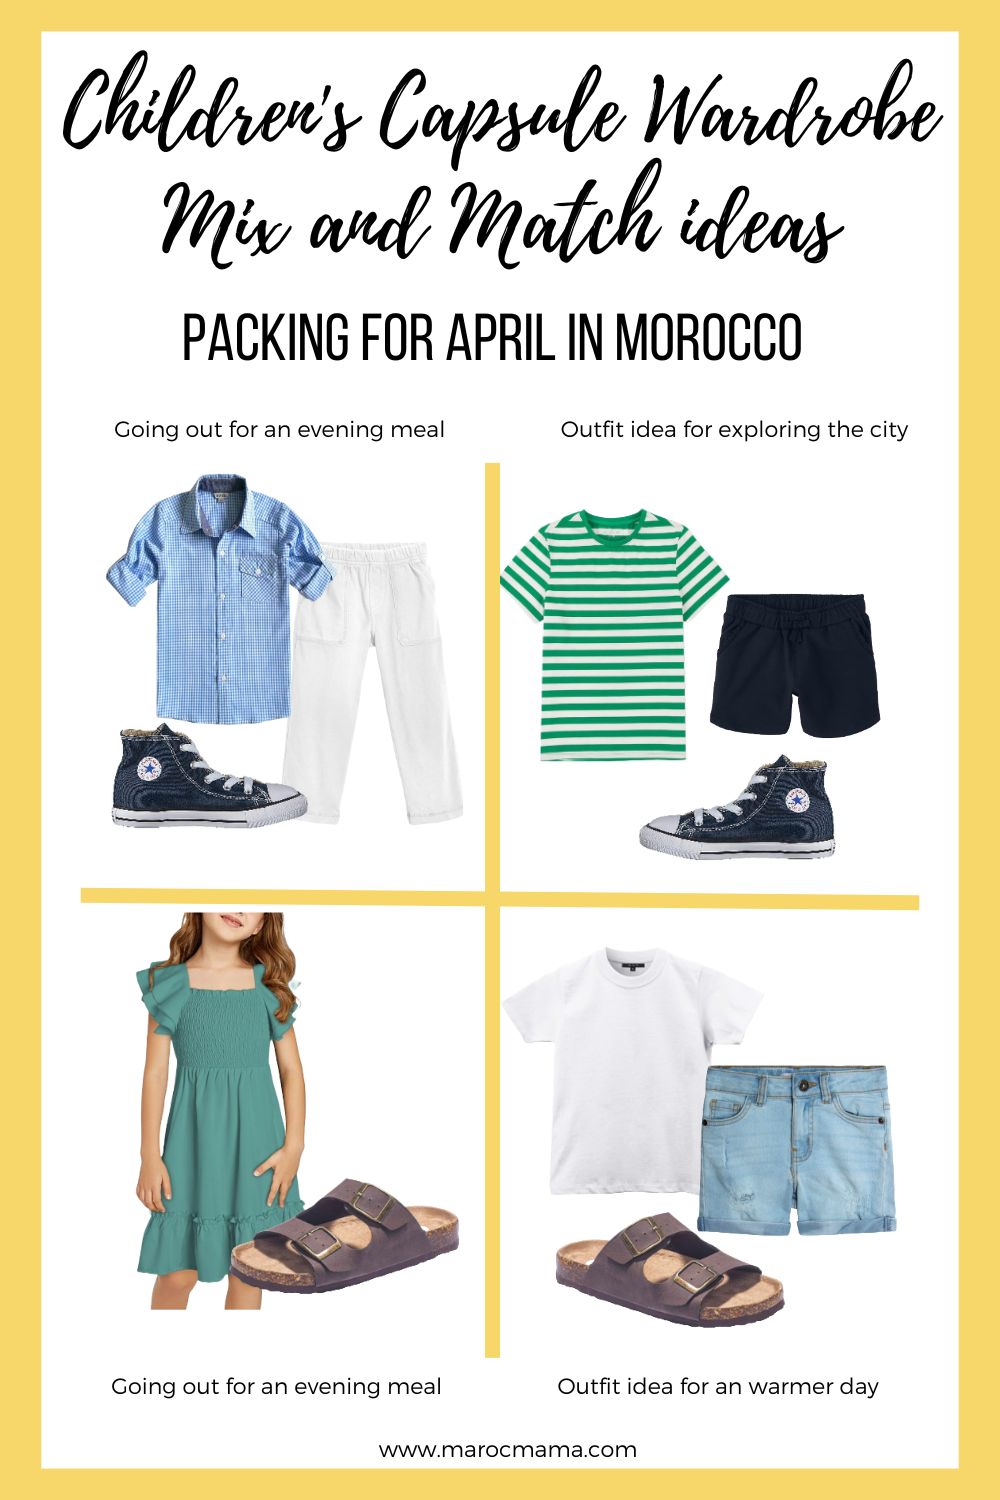 Children's capsule wardrobe mix and match ideas, packing for April in Morocco